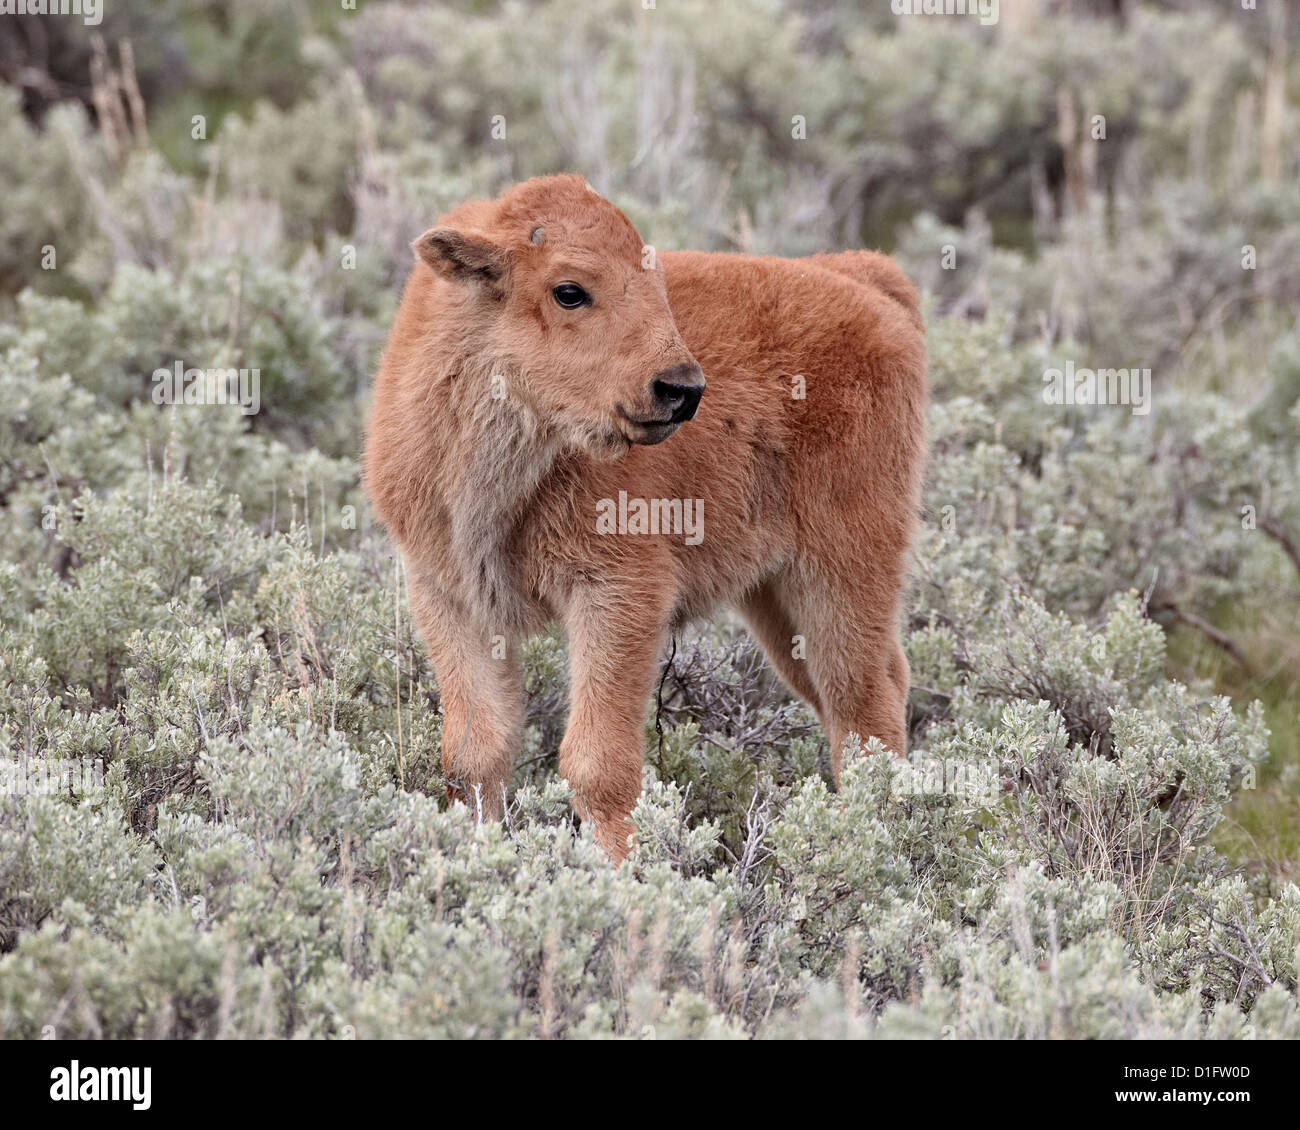 Bison (Bison bison) calf, Yellowstone National Park, Wyoming, United States of America, North America Stock Photo